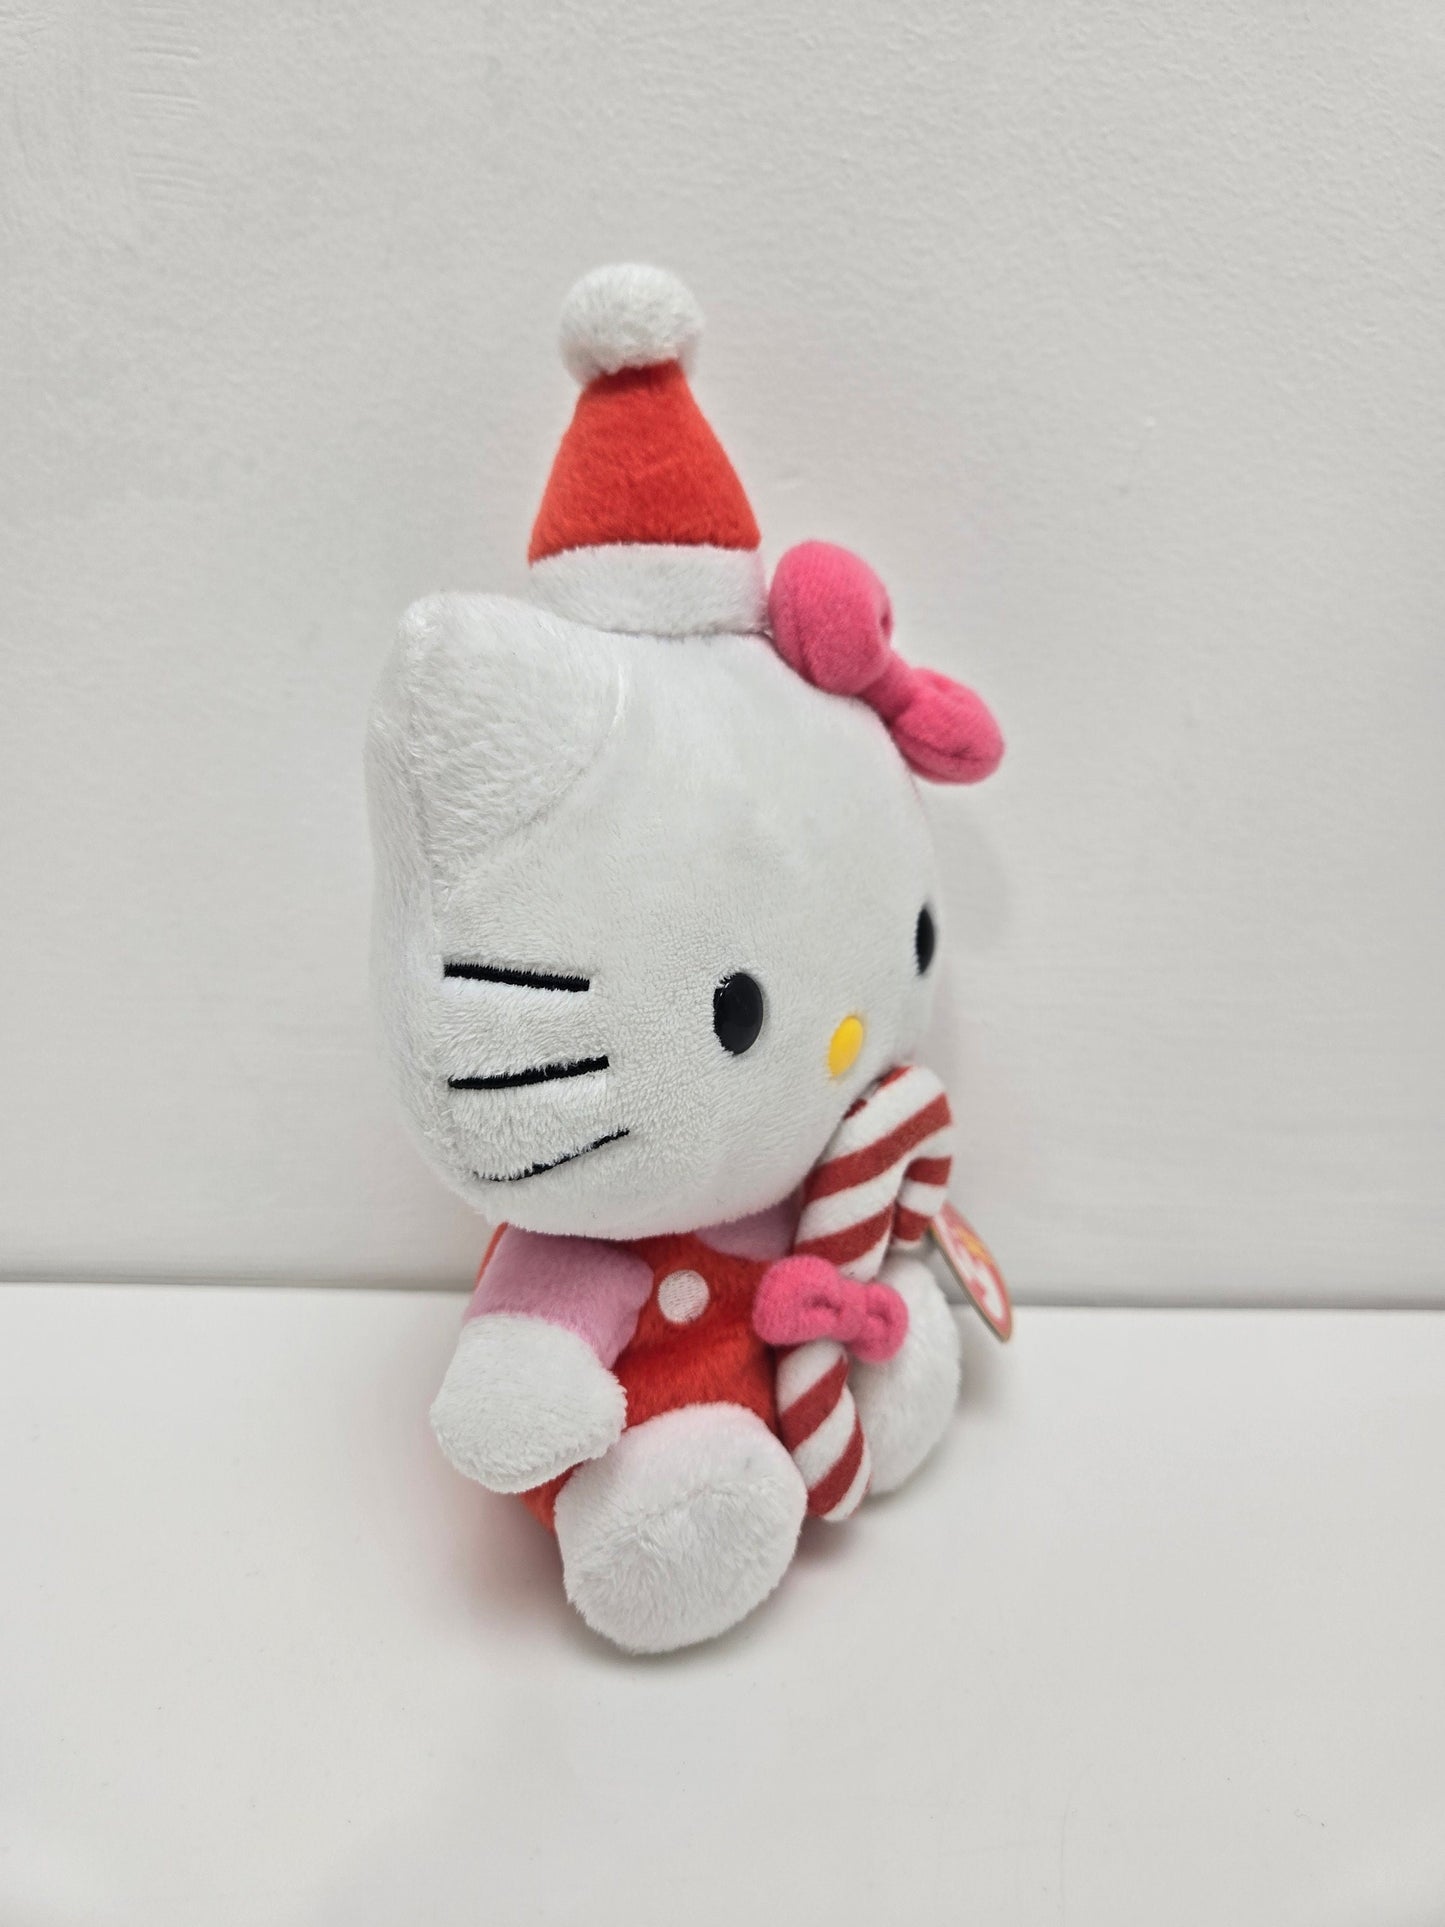 Ty Beanie Baby “Hello Kitty” the Holiday Hello Kitty Plush Holding Candy Cane  (5.5 inch)